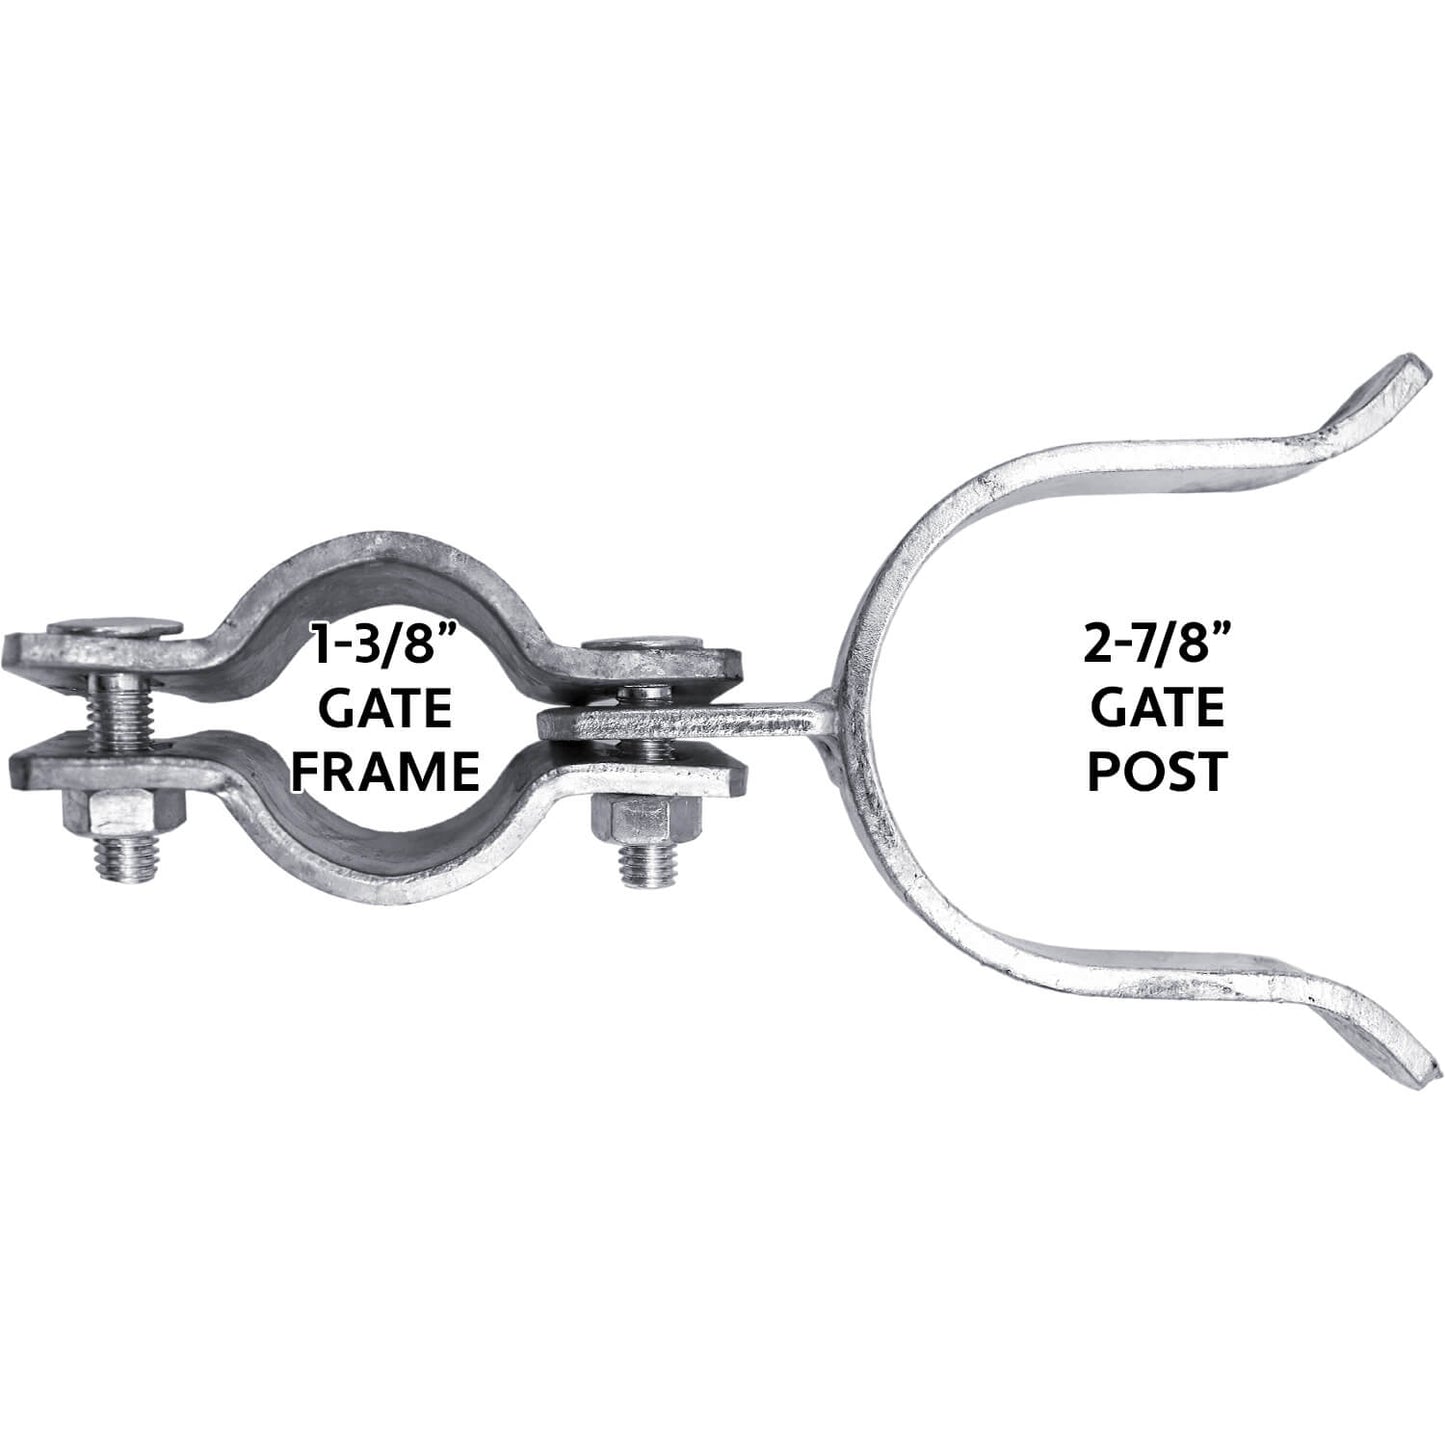 Chain Link Fence Gate Fork Latch -  Fence Gate Latch - Galvanized Fence Gate Latch With Hole for Padlock